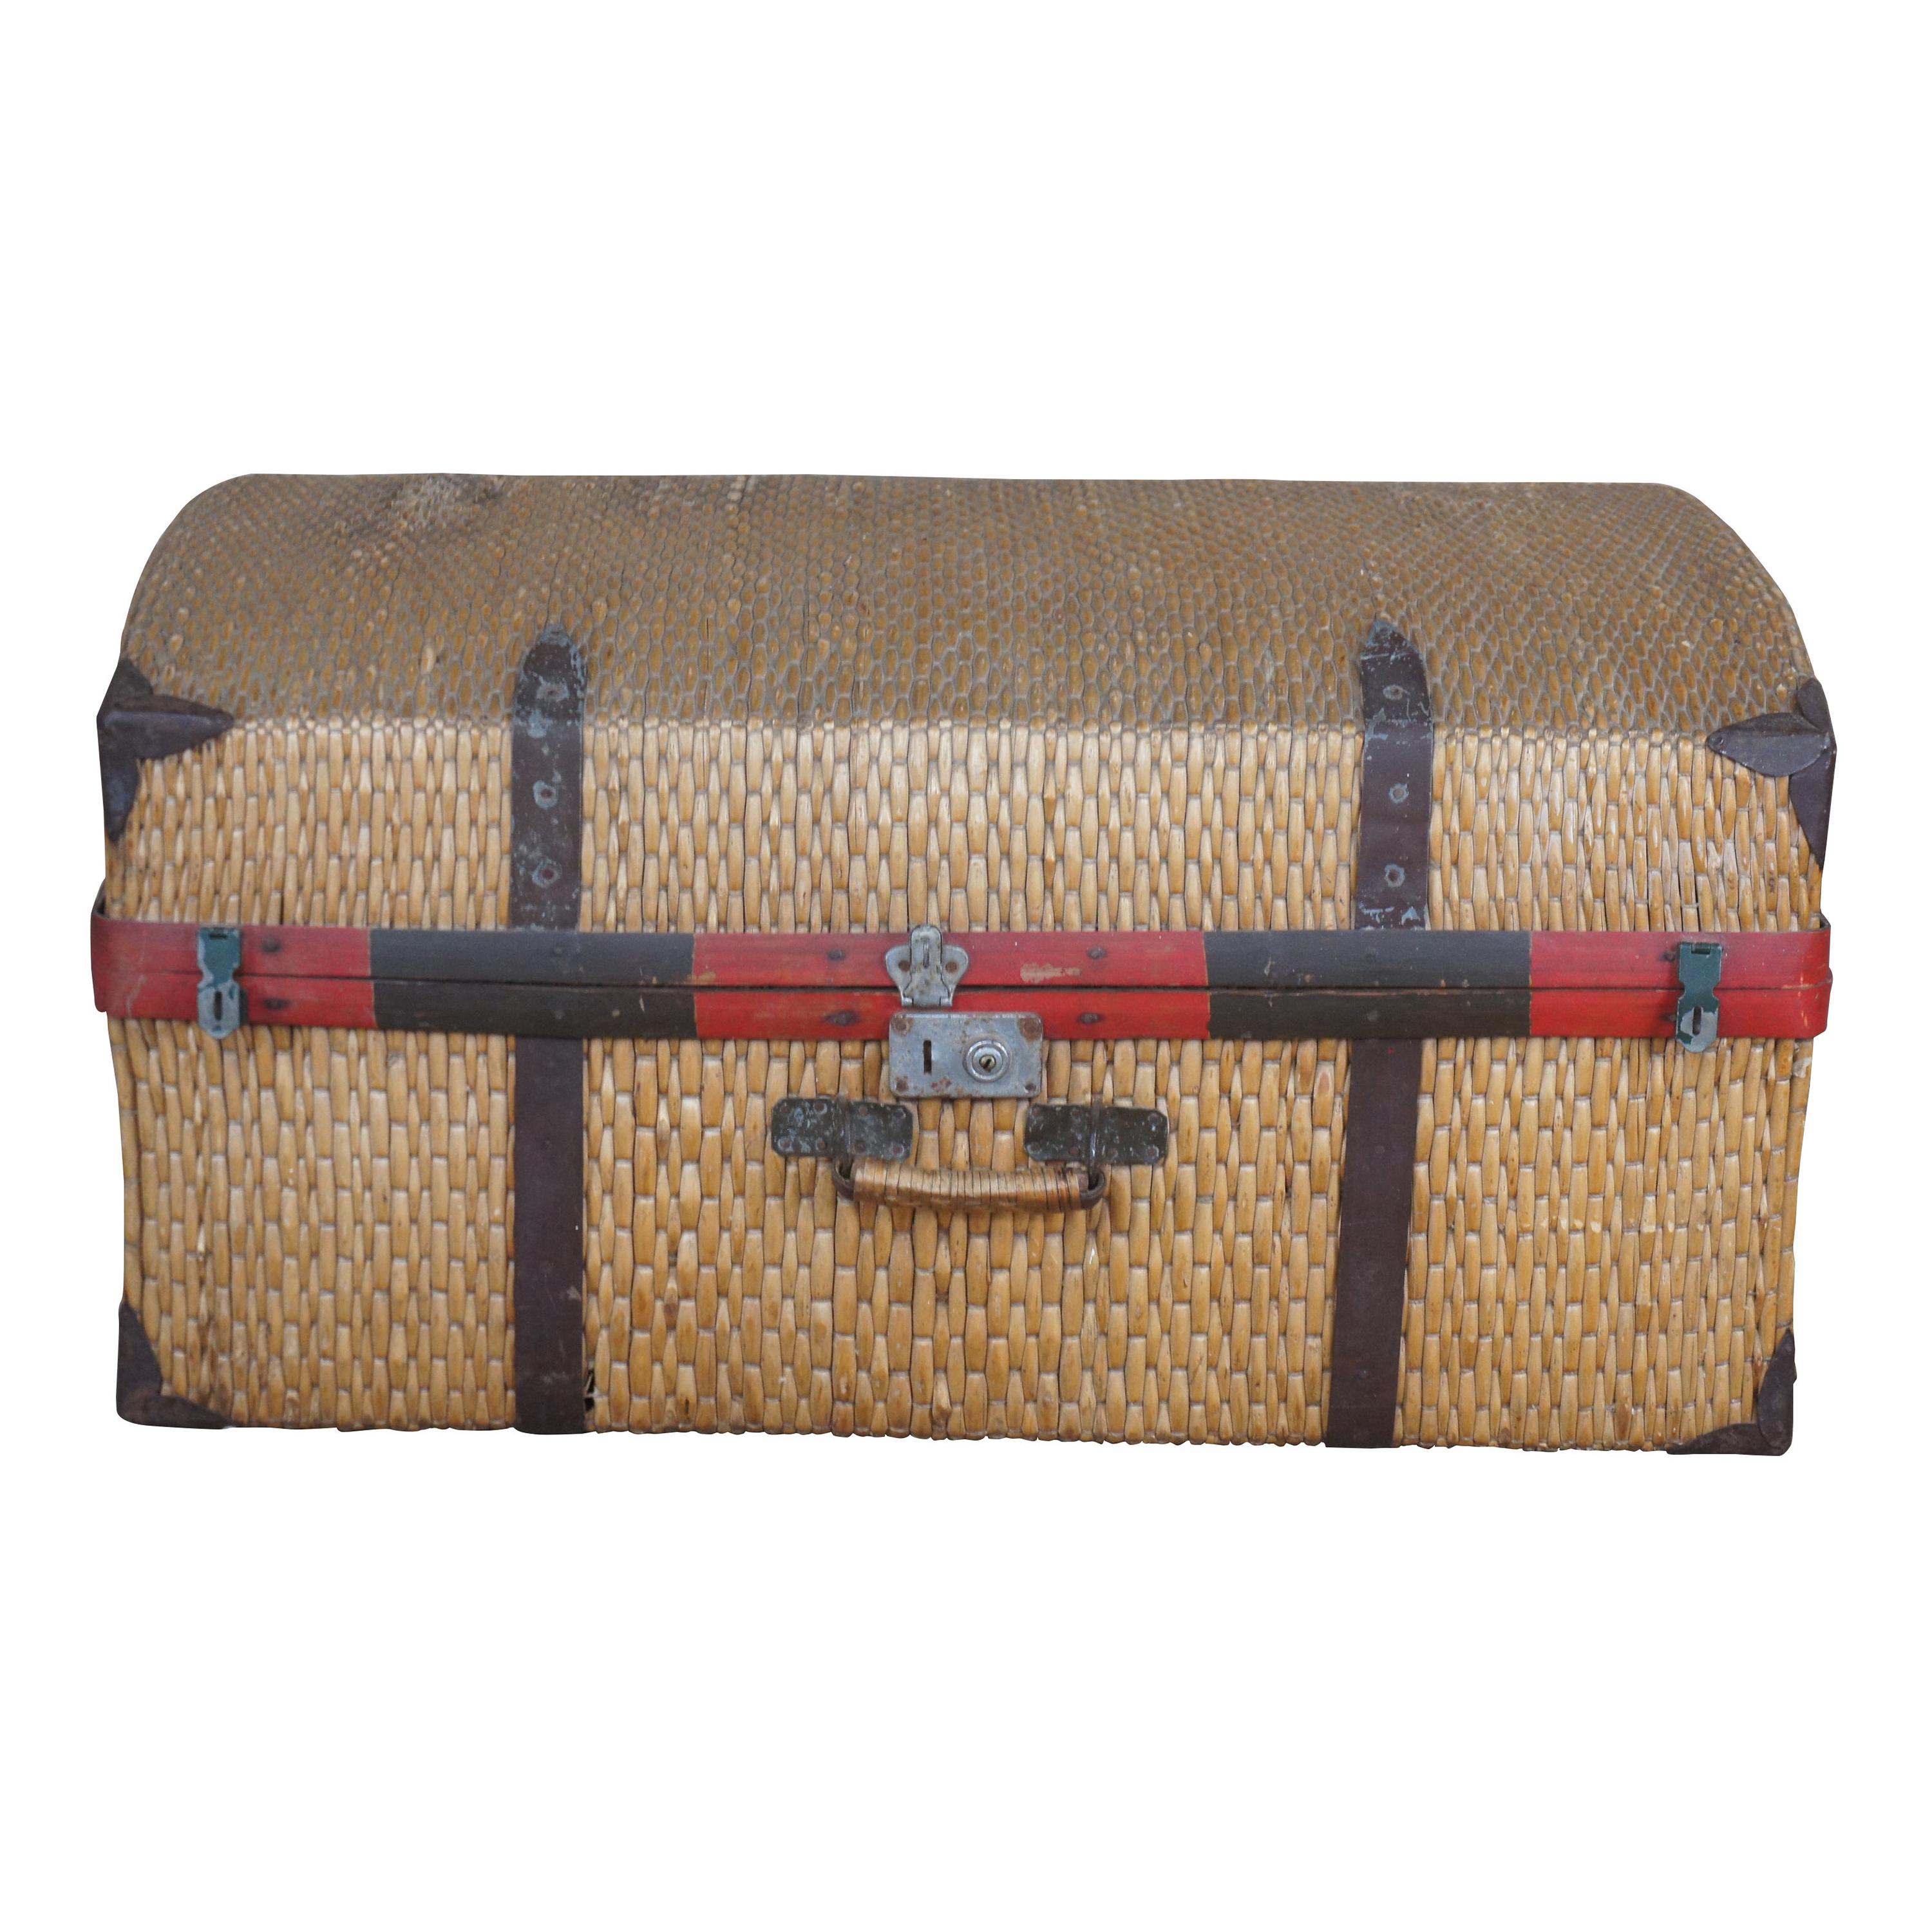 Antique Woven Rattan Bamboo Suitcase Luggage Trunk Coffee Table Boho Chic